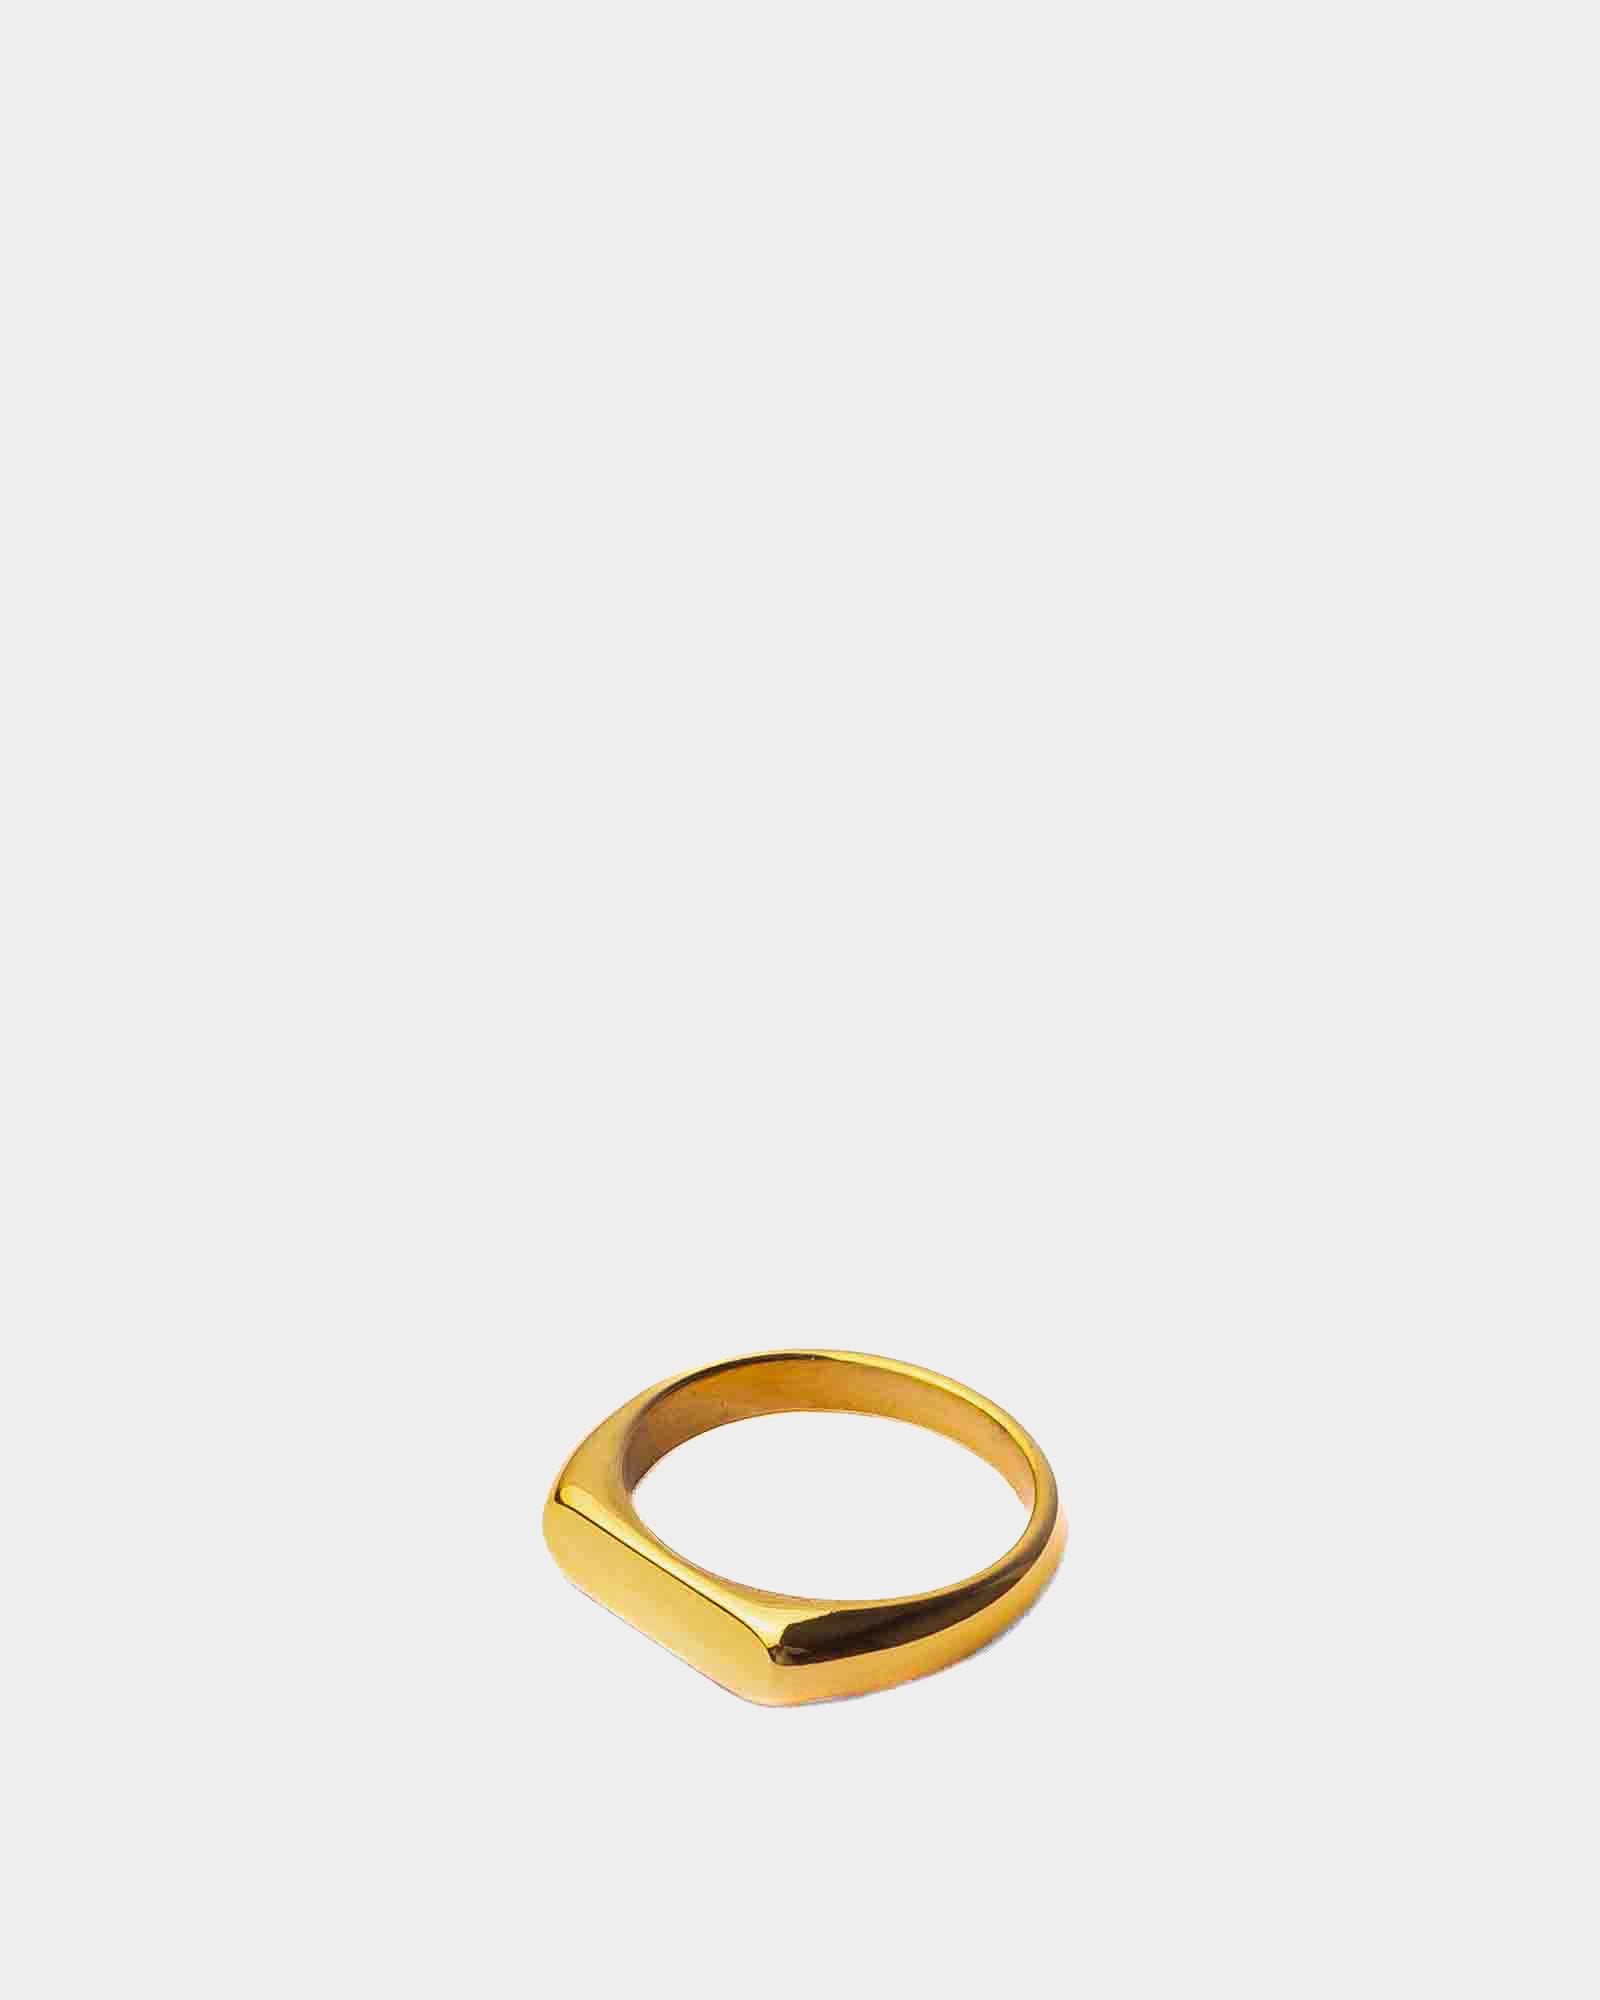 UNISEX RINGS – Equiivalence